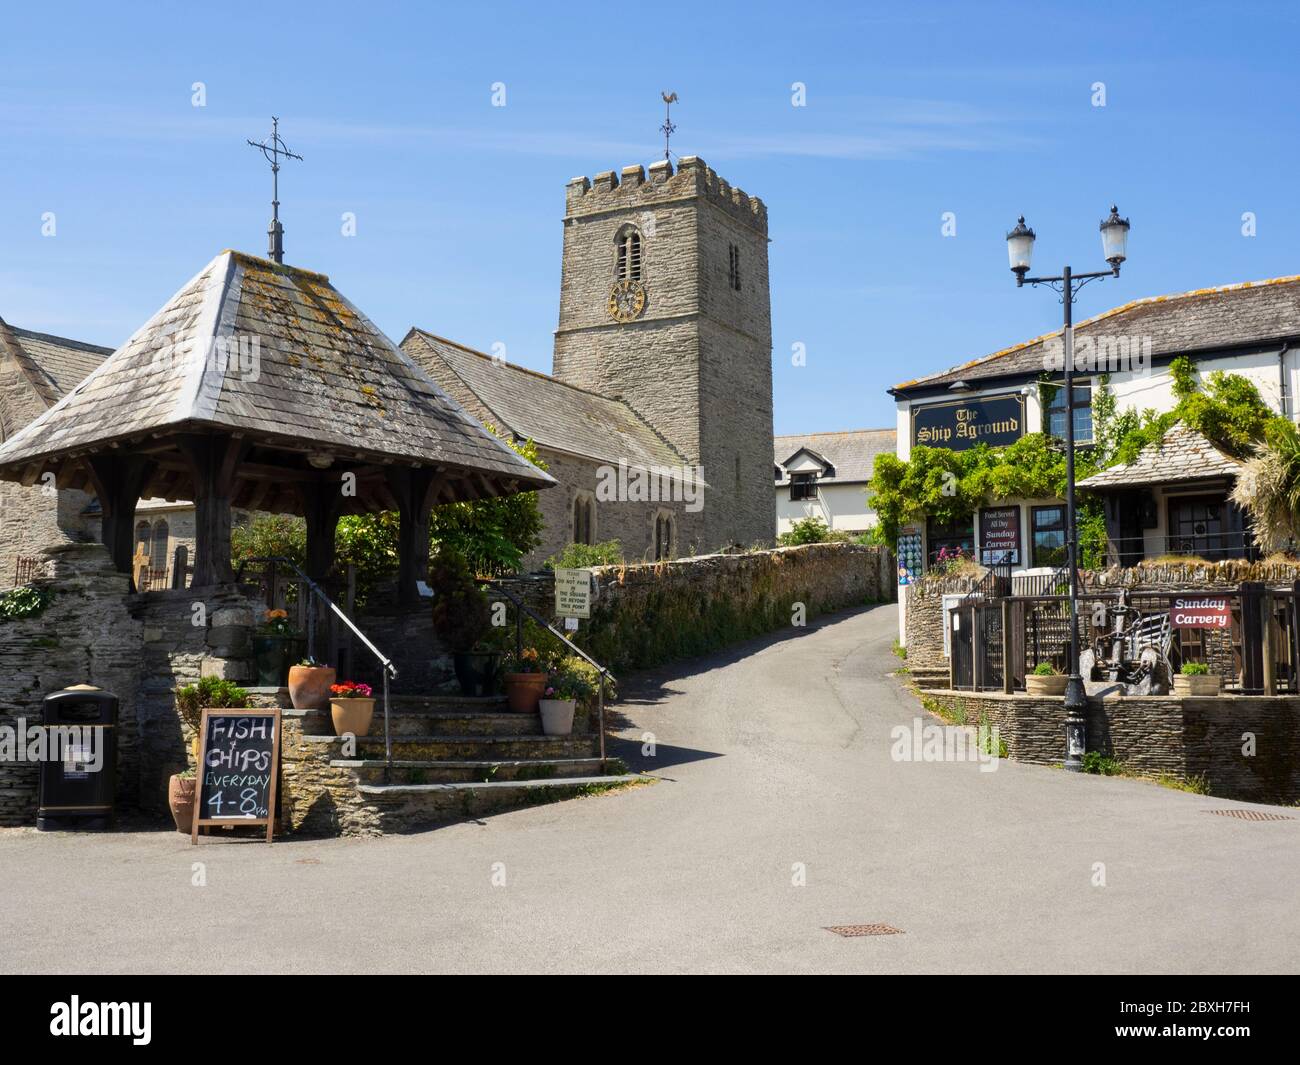 St Mary's Church and the Ship Aground pub in the village centre, Mortehoe, North Devon, UK Stock Photo